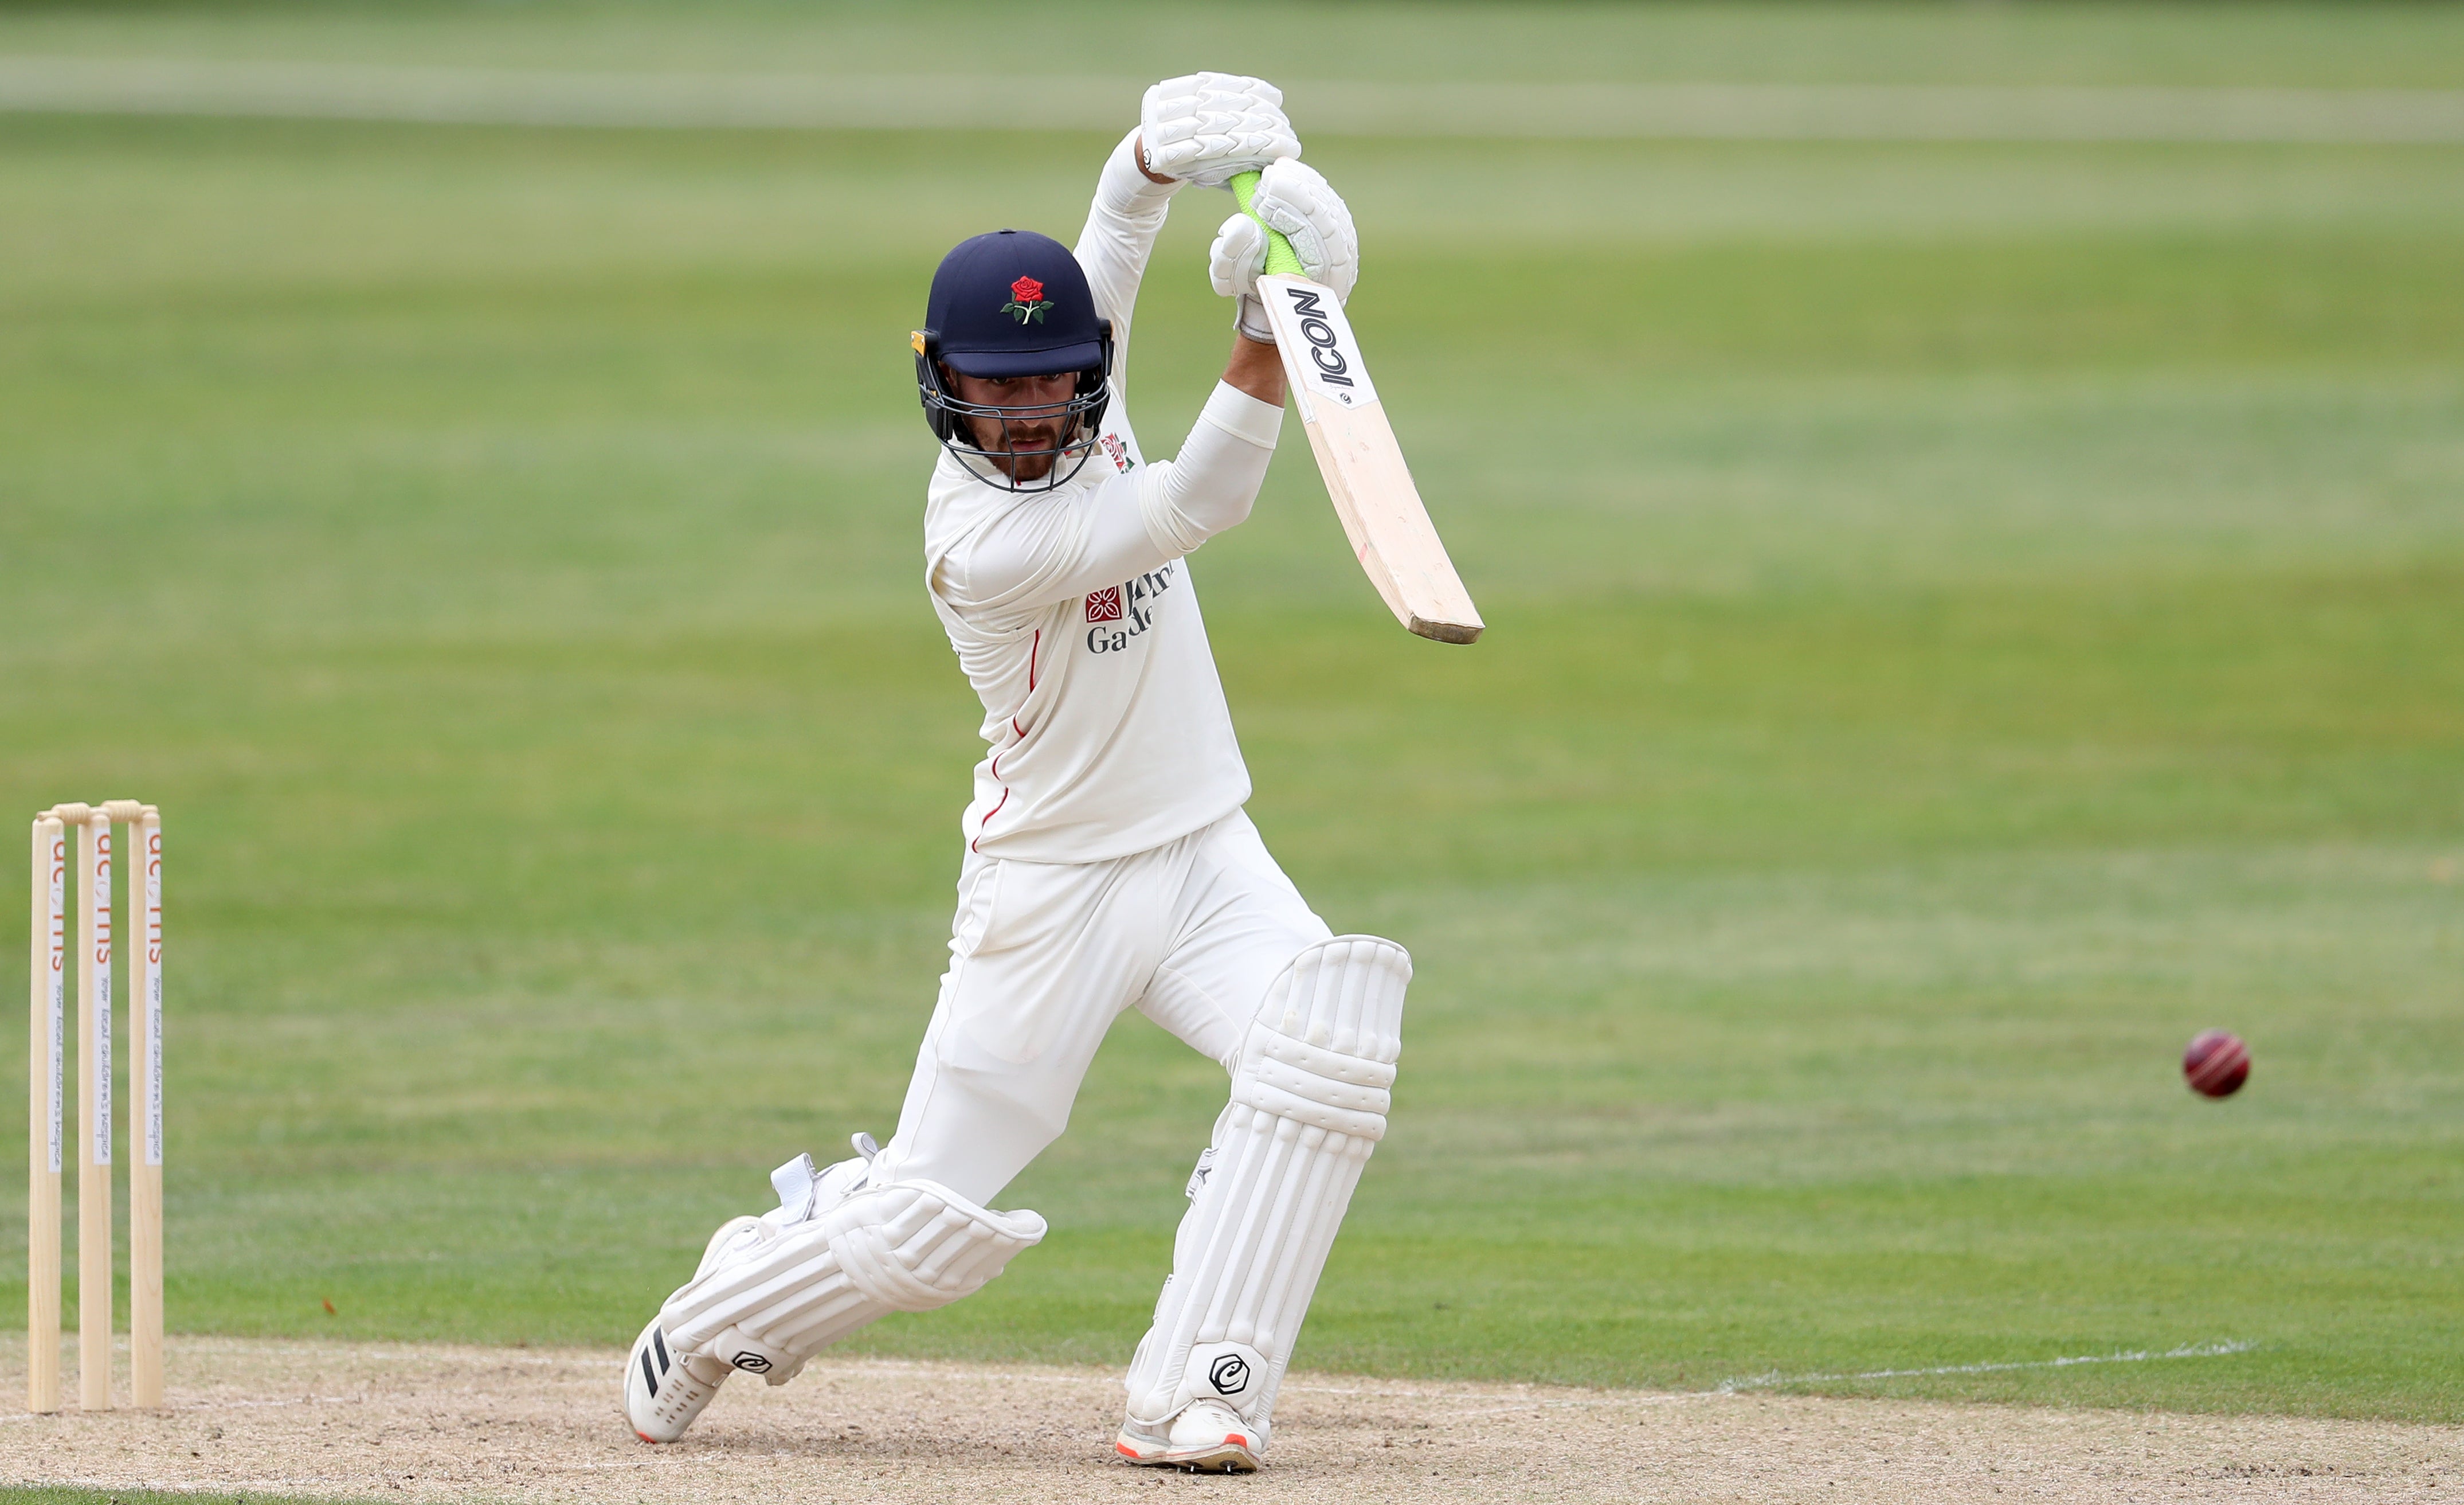 Josh Bohannon's unbeaten 127 gave Lancashire a first-innings lead of 350 in the Roses Championship clash